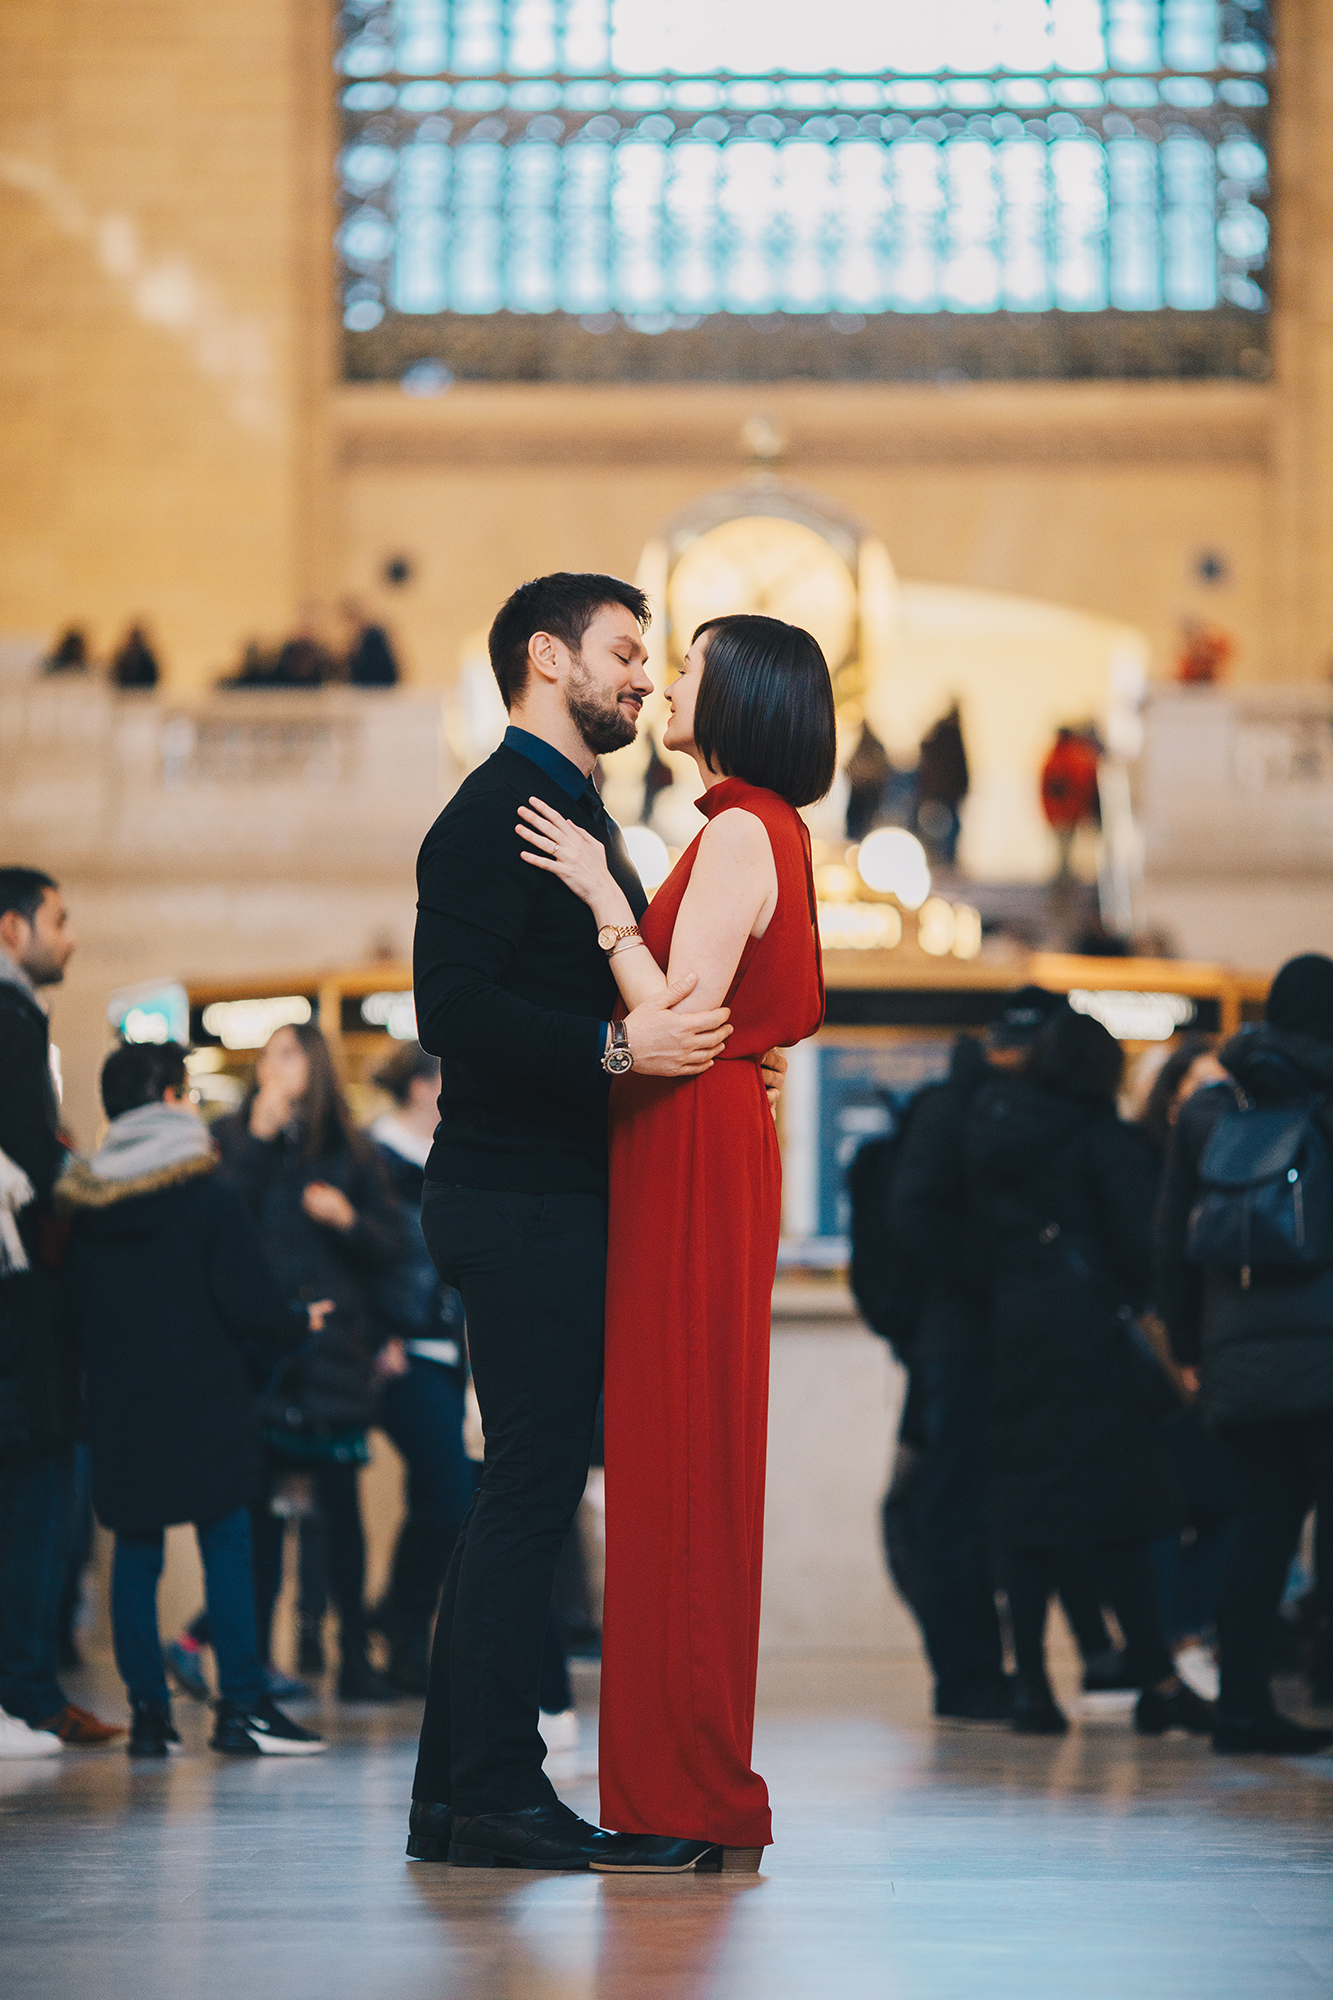 Pretty Times Square Engagement Photos and Grand Central Engagement Photography in NYC